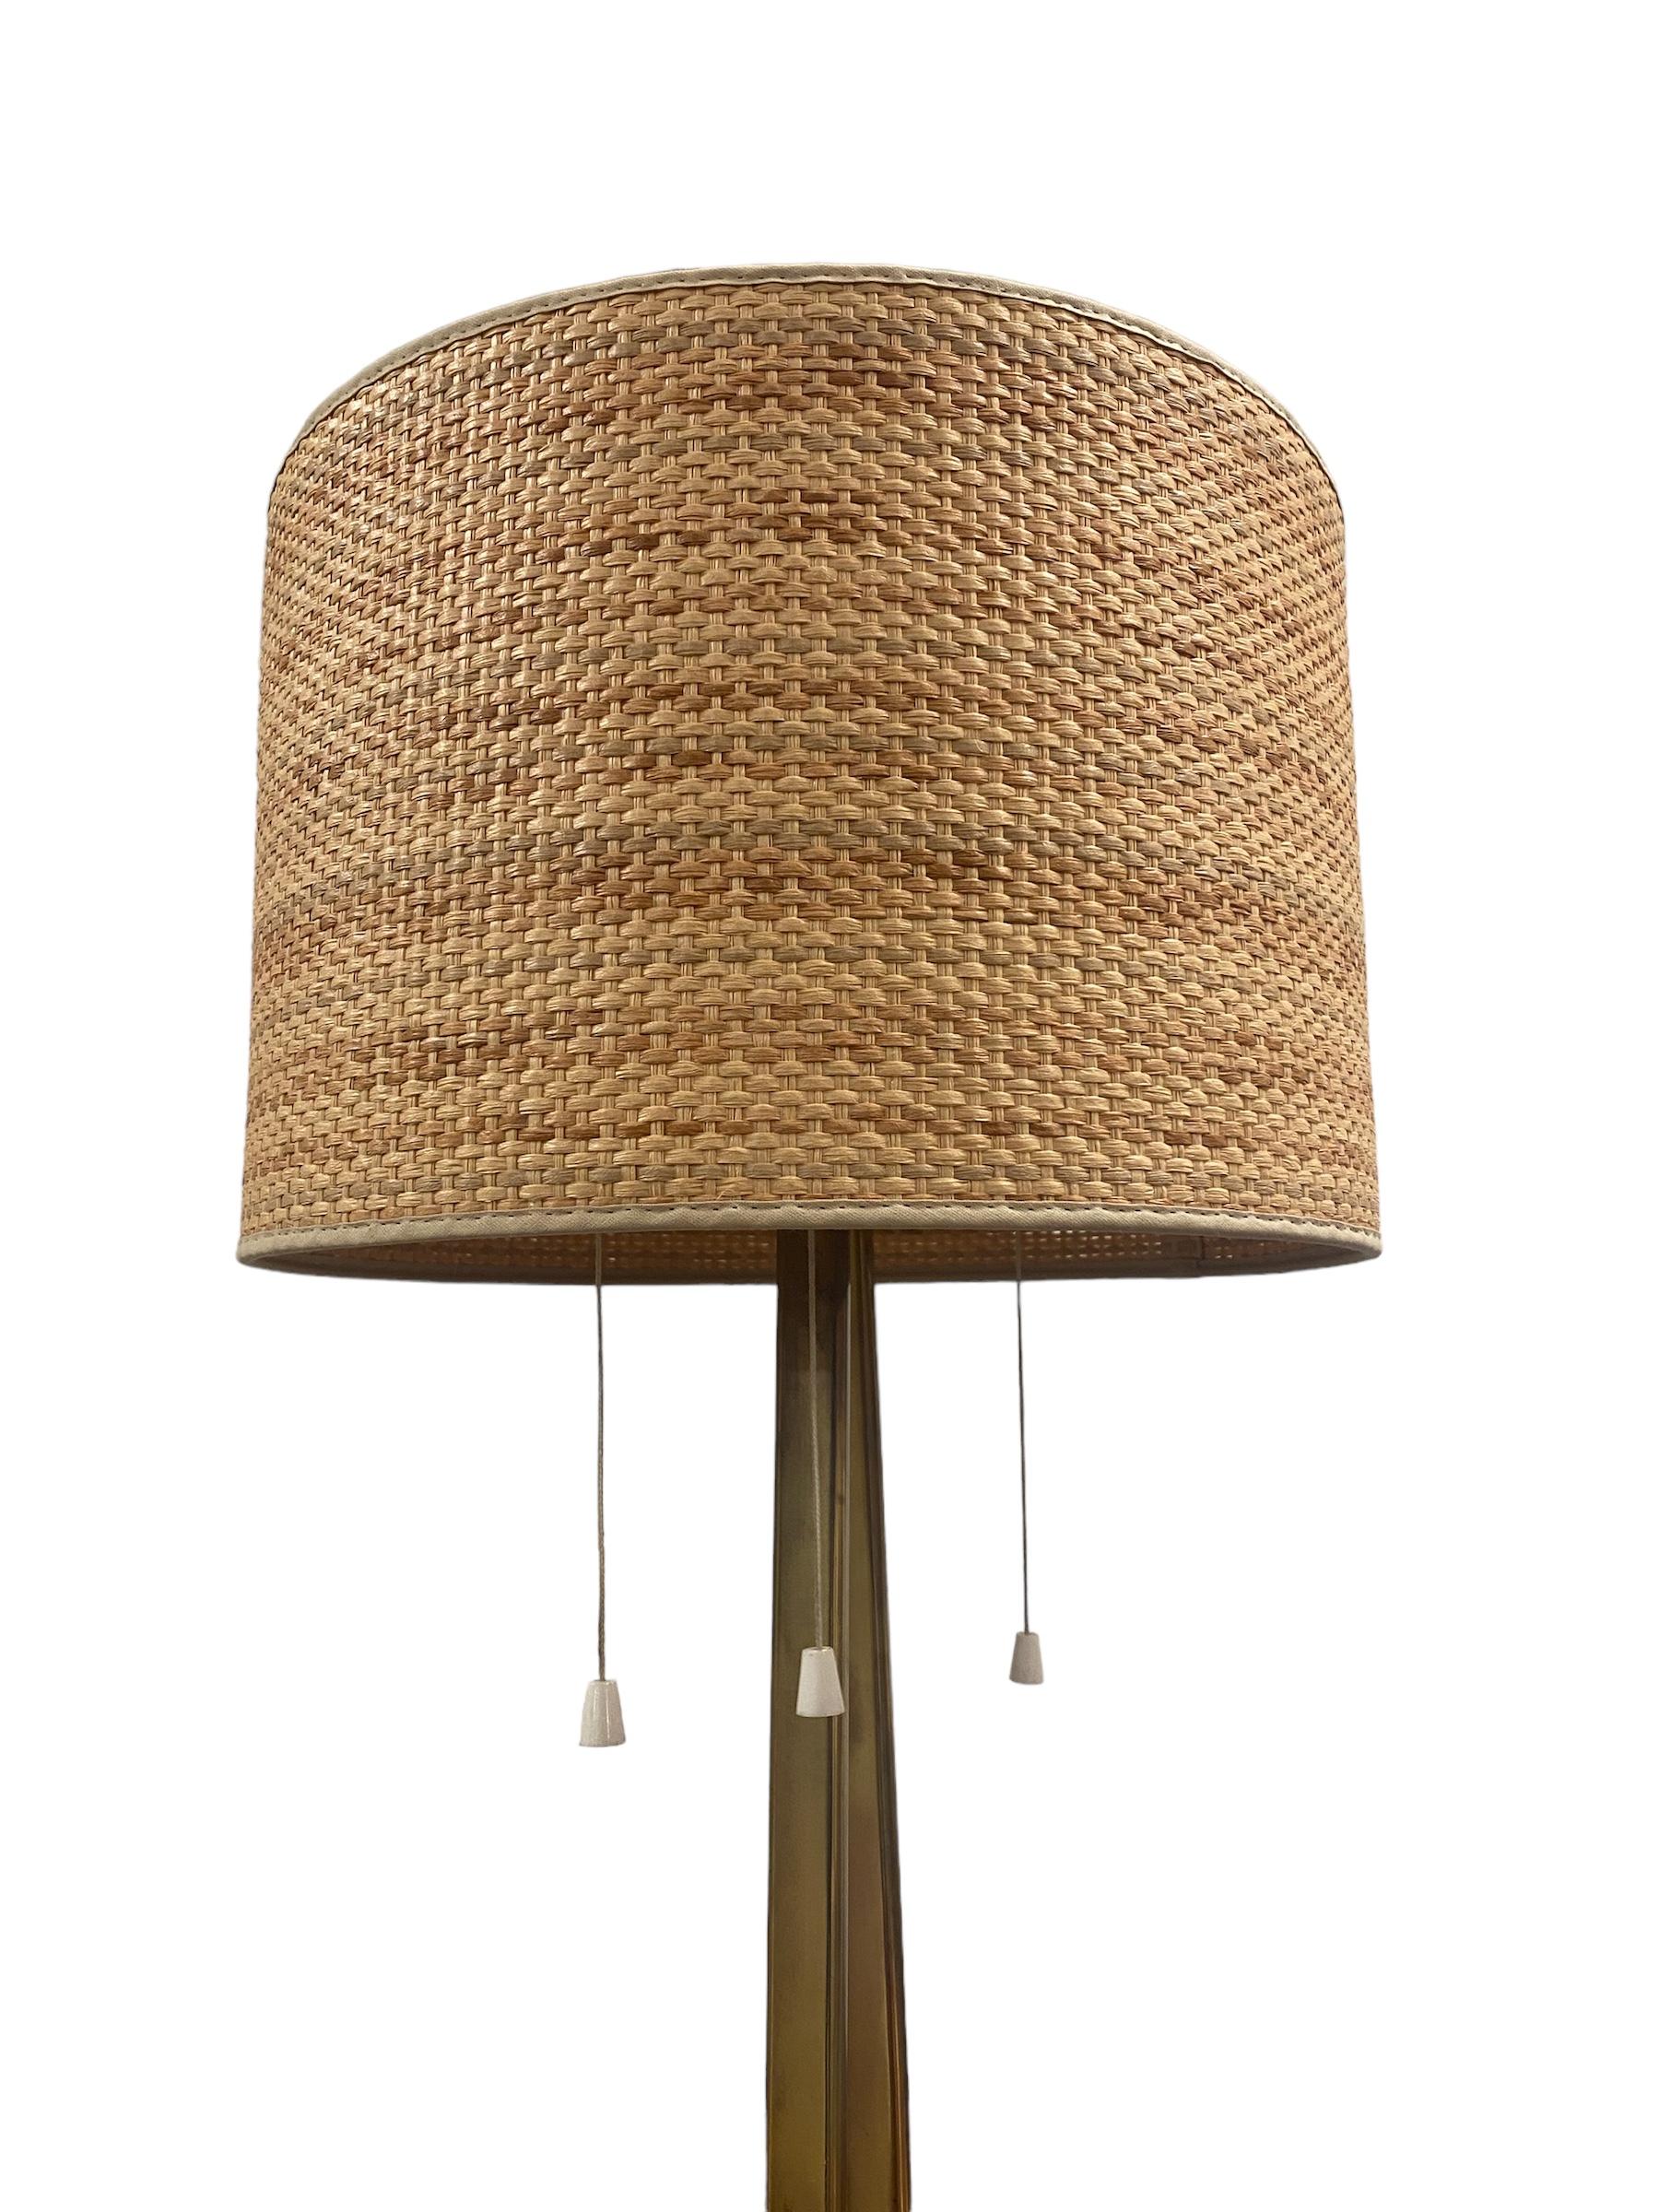 Finnish Paavo Tynell Commissioned Table Lamp, Taito For Sale